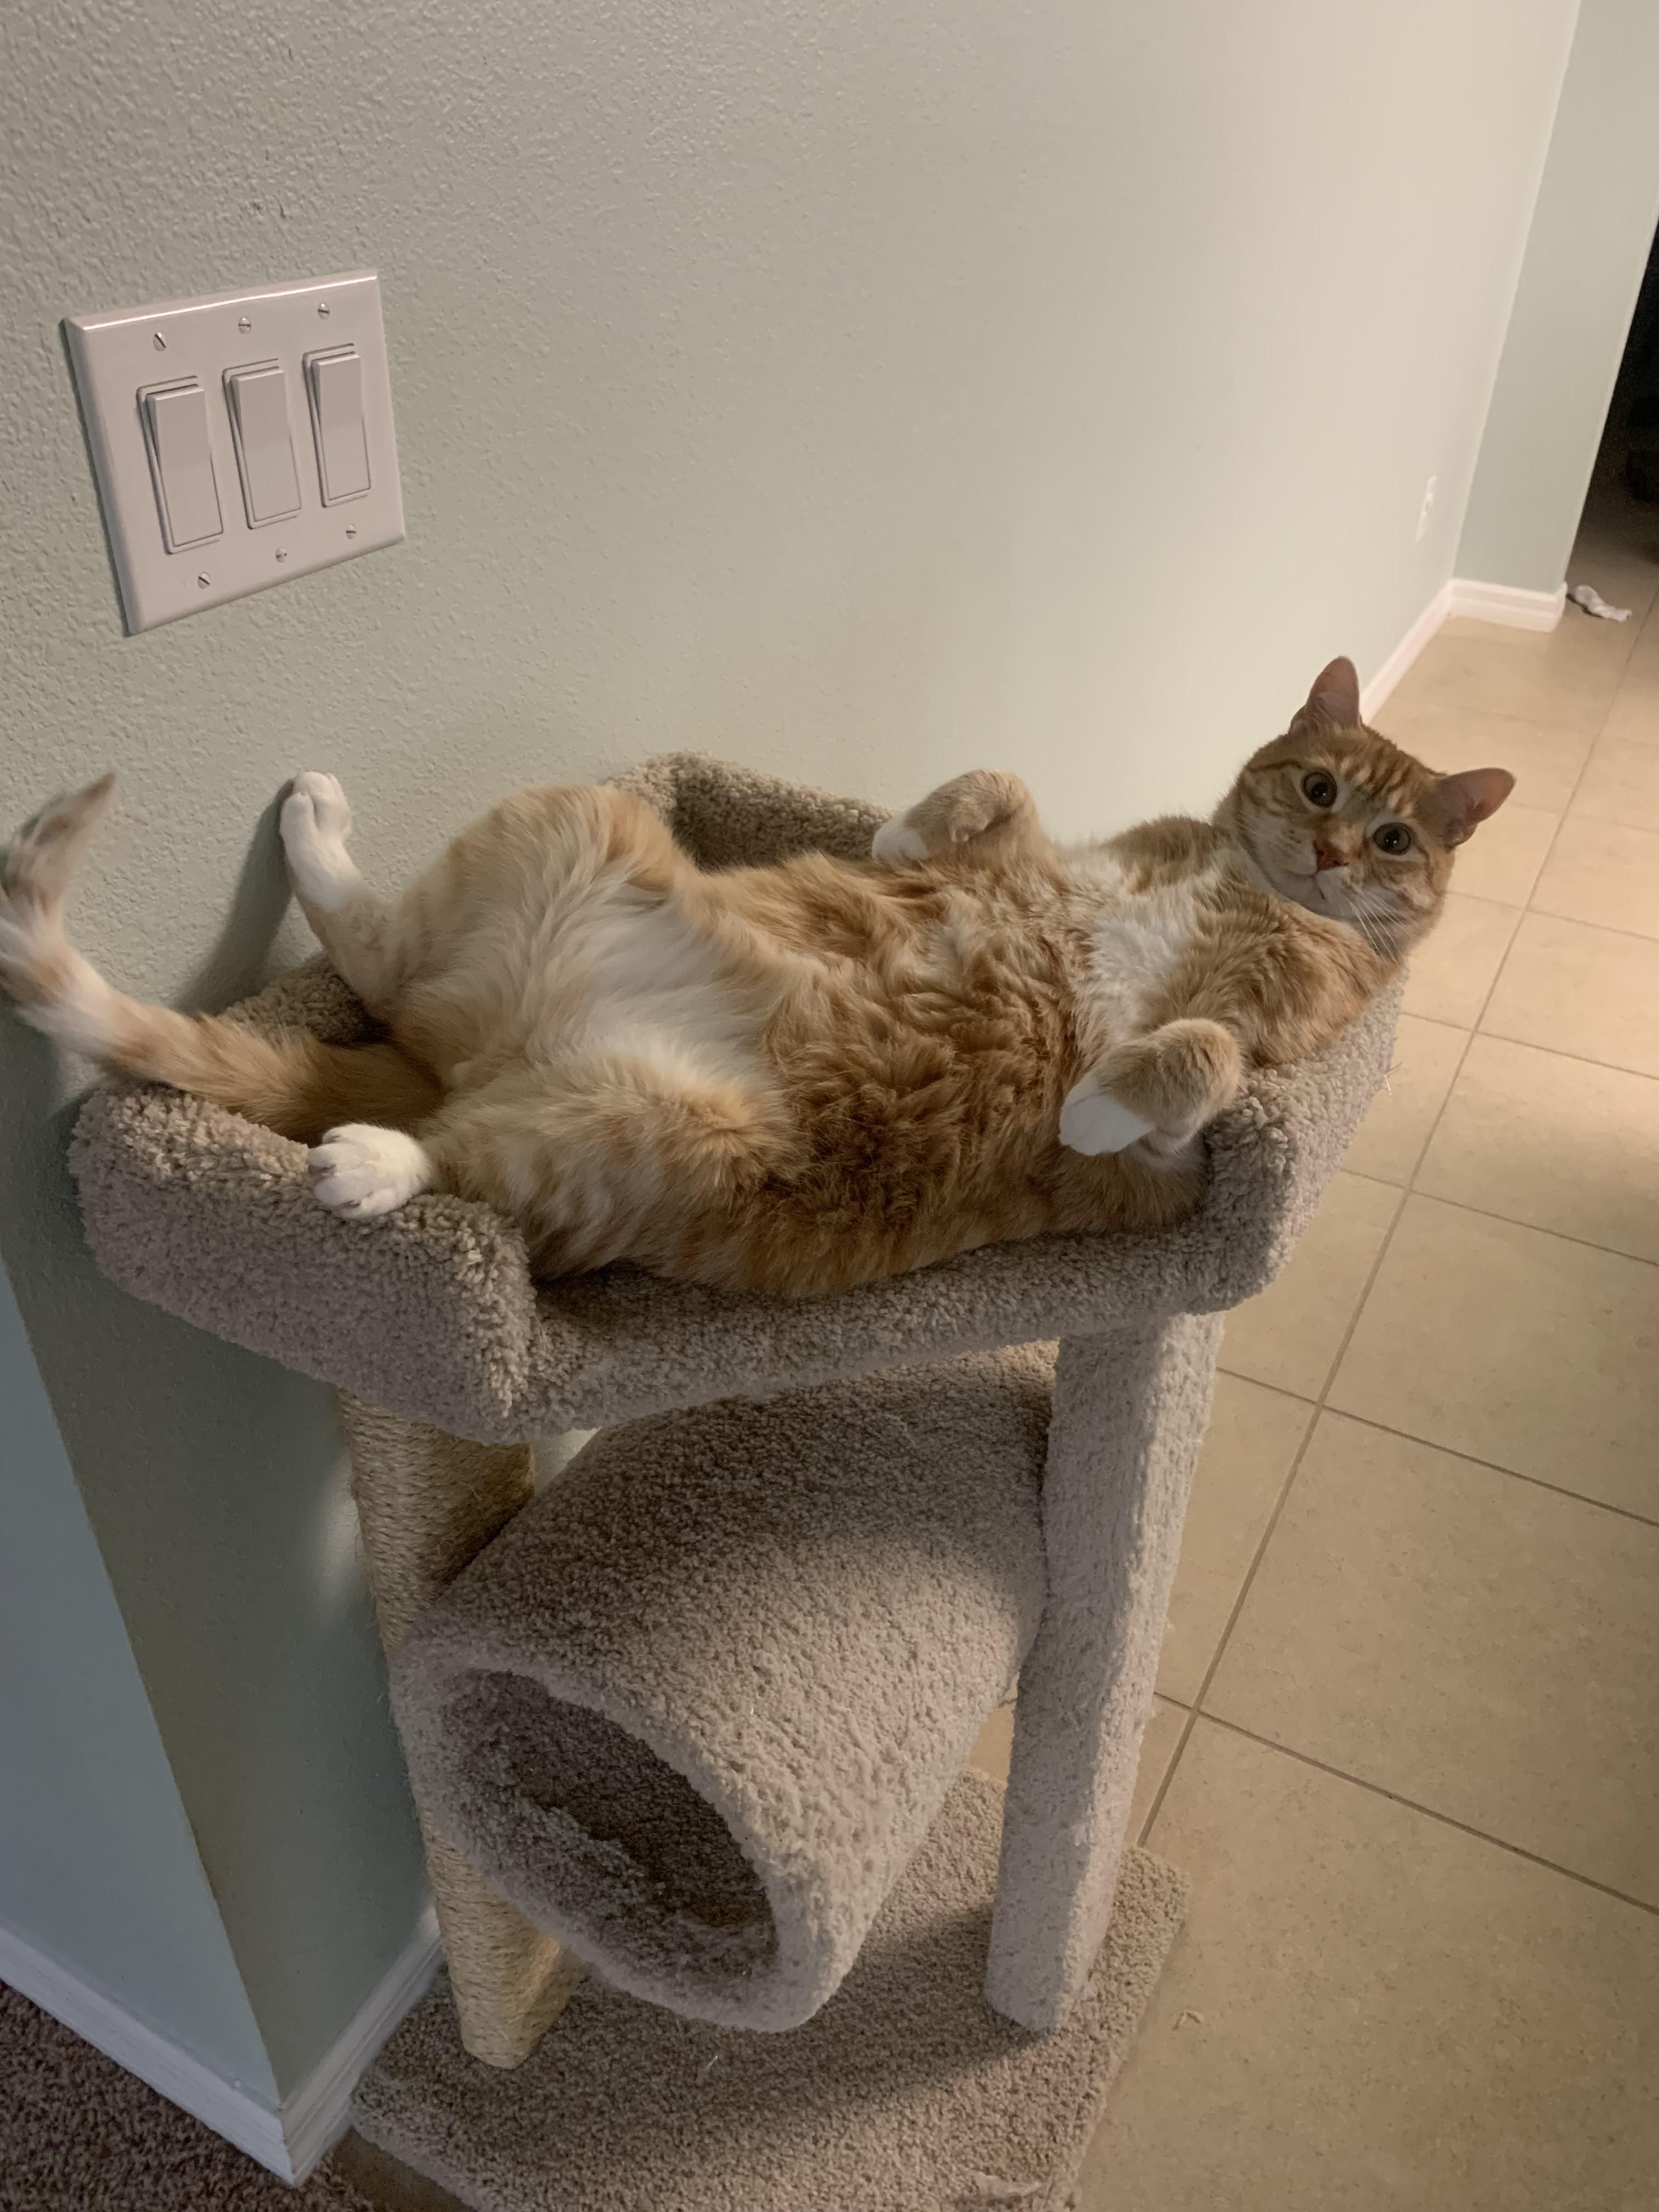 Got a new cat stand. I think he likes it.